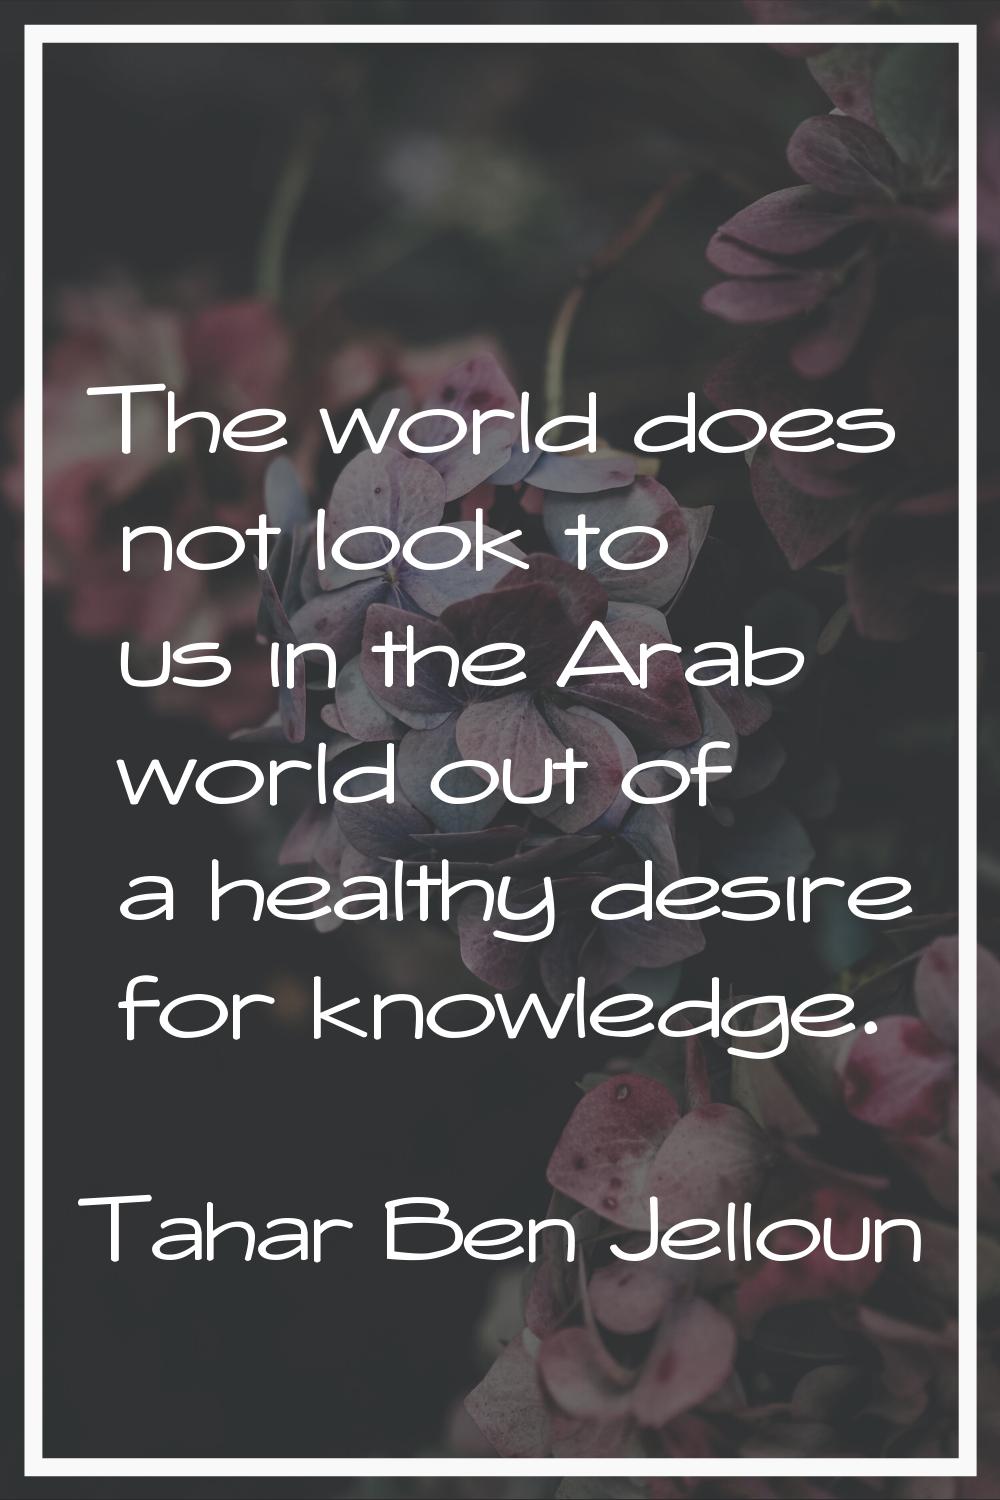 The world does not look to us in the Arab world out of a healthy desire for knowledge.